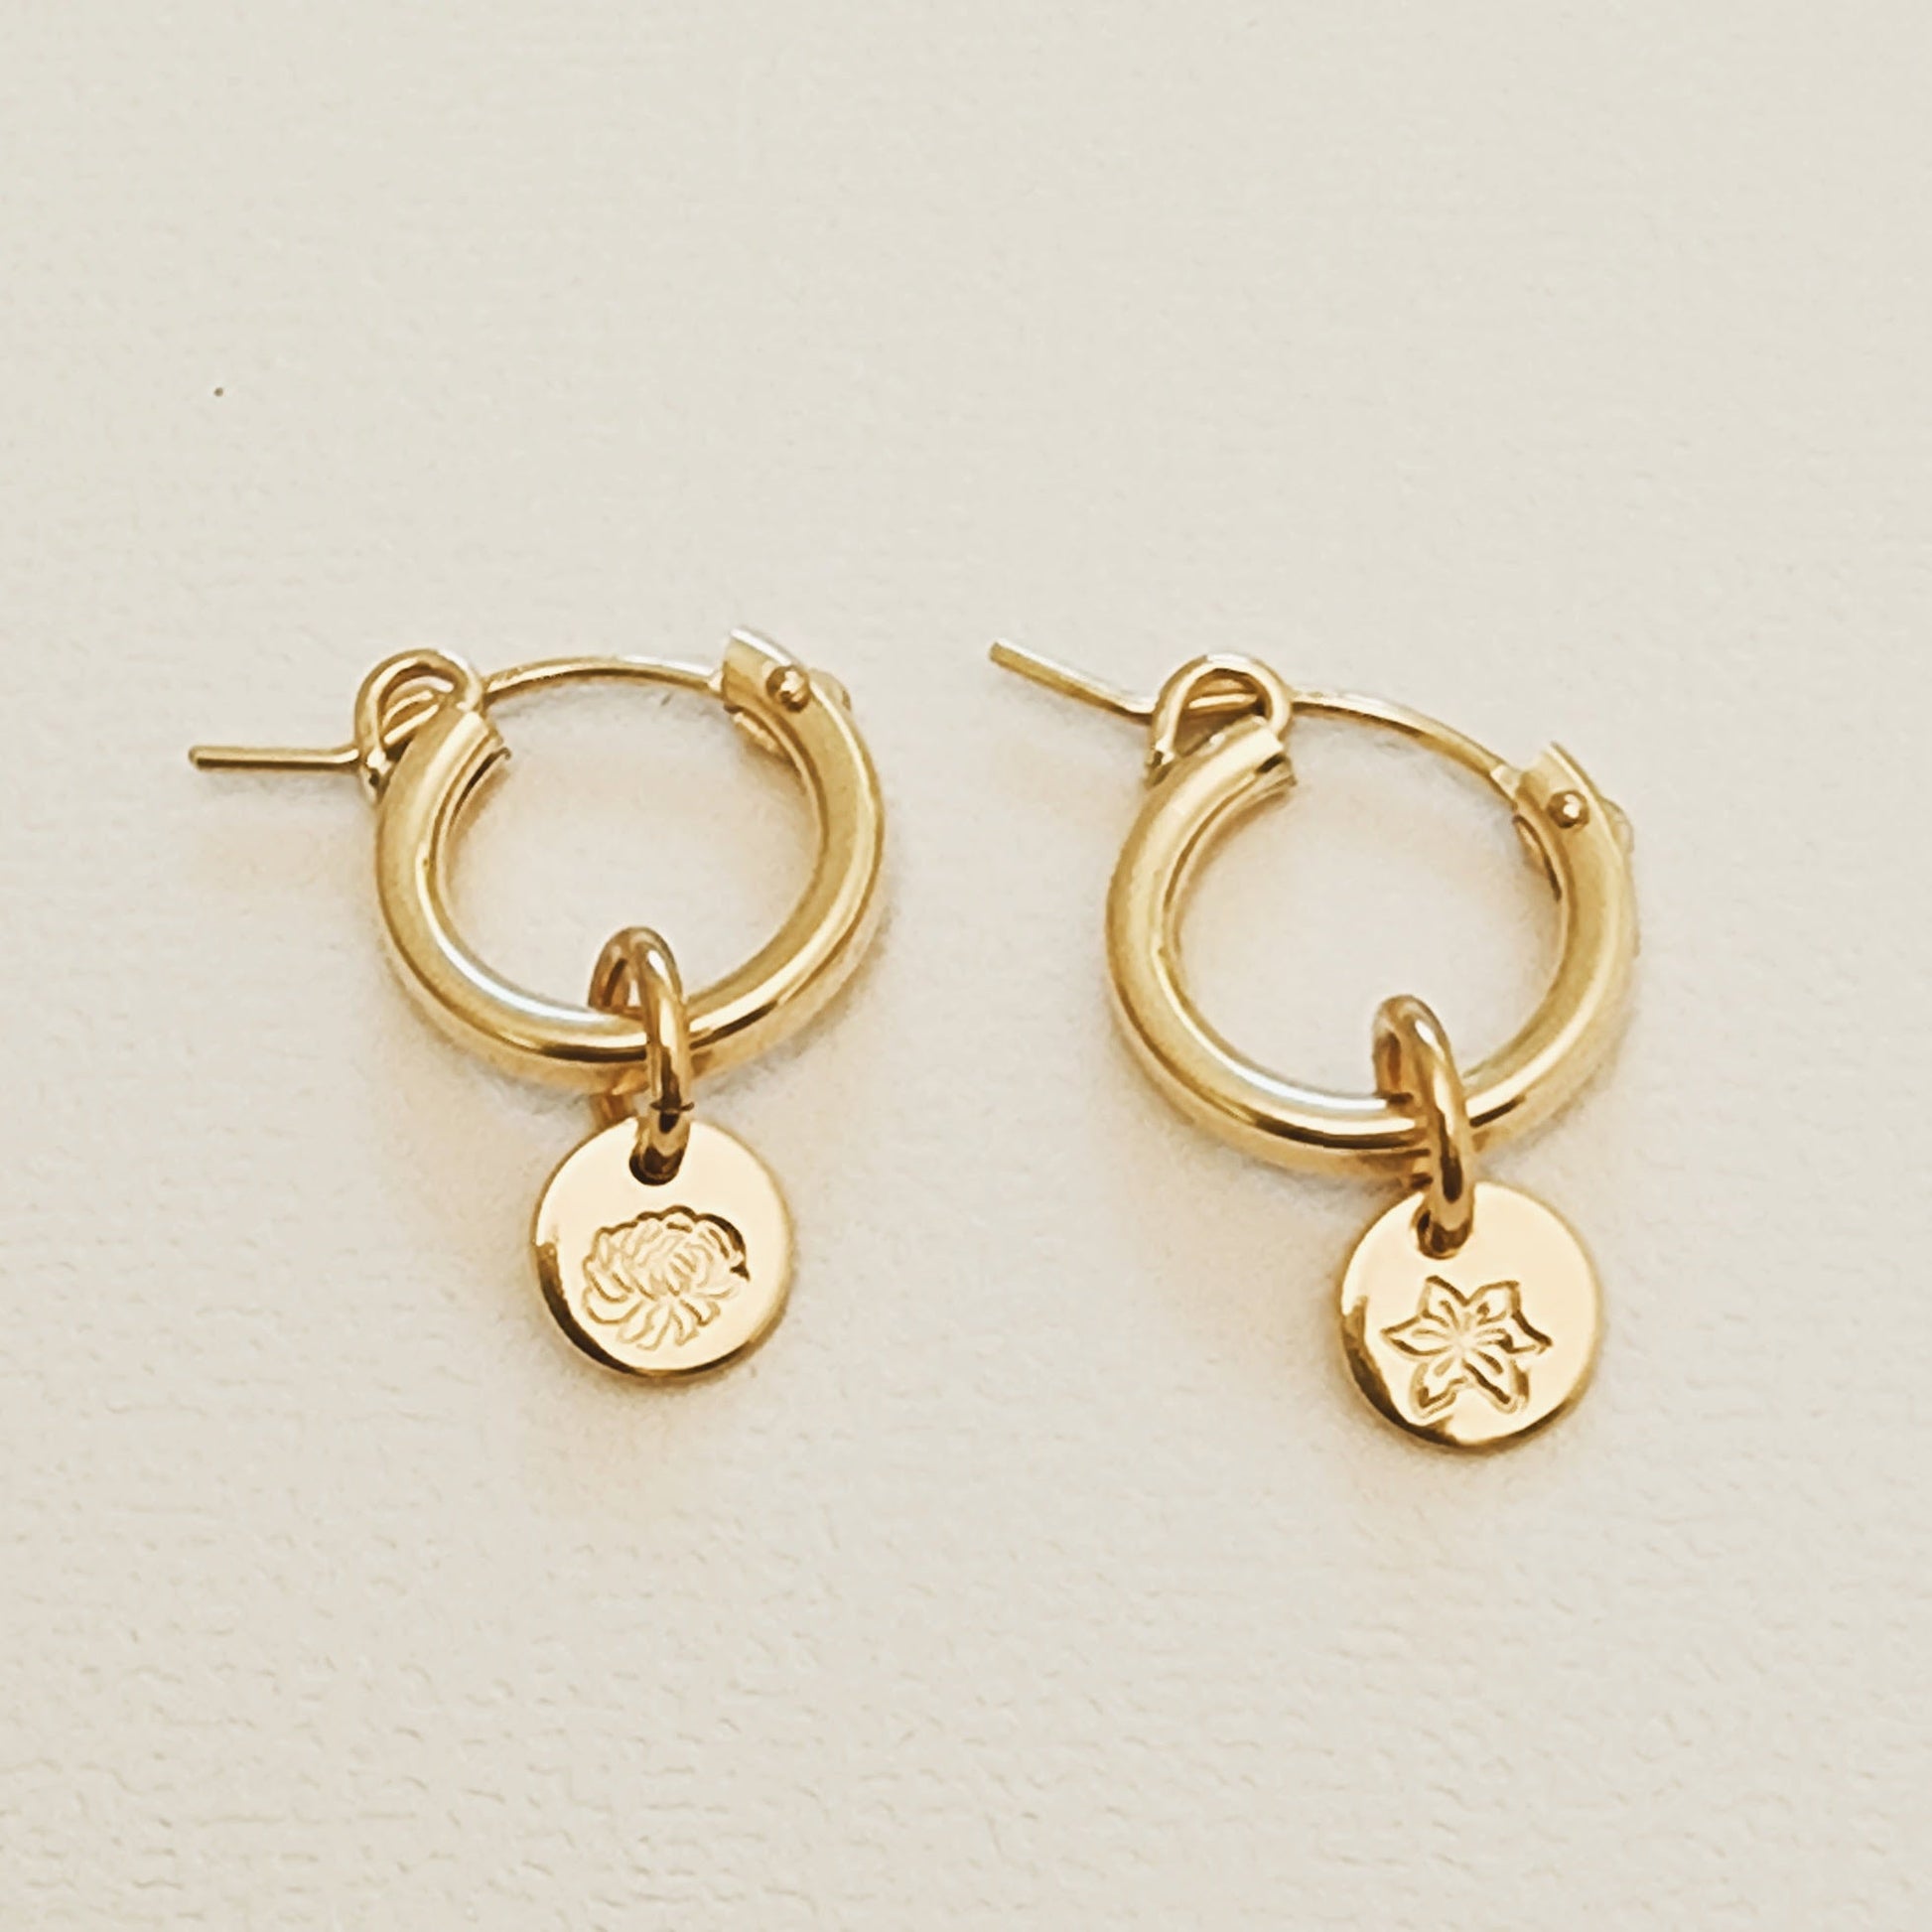 Minimal Hoop Tag Earrings - Small - Going Golden